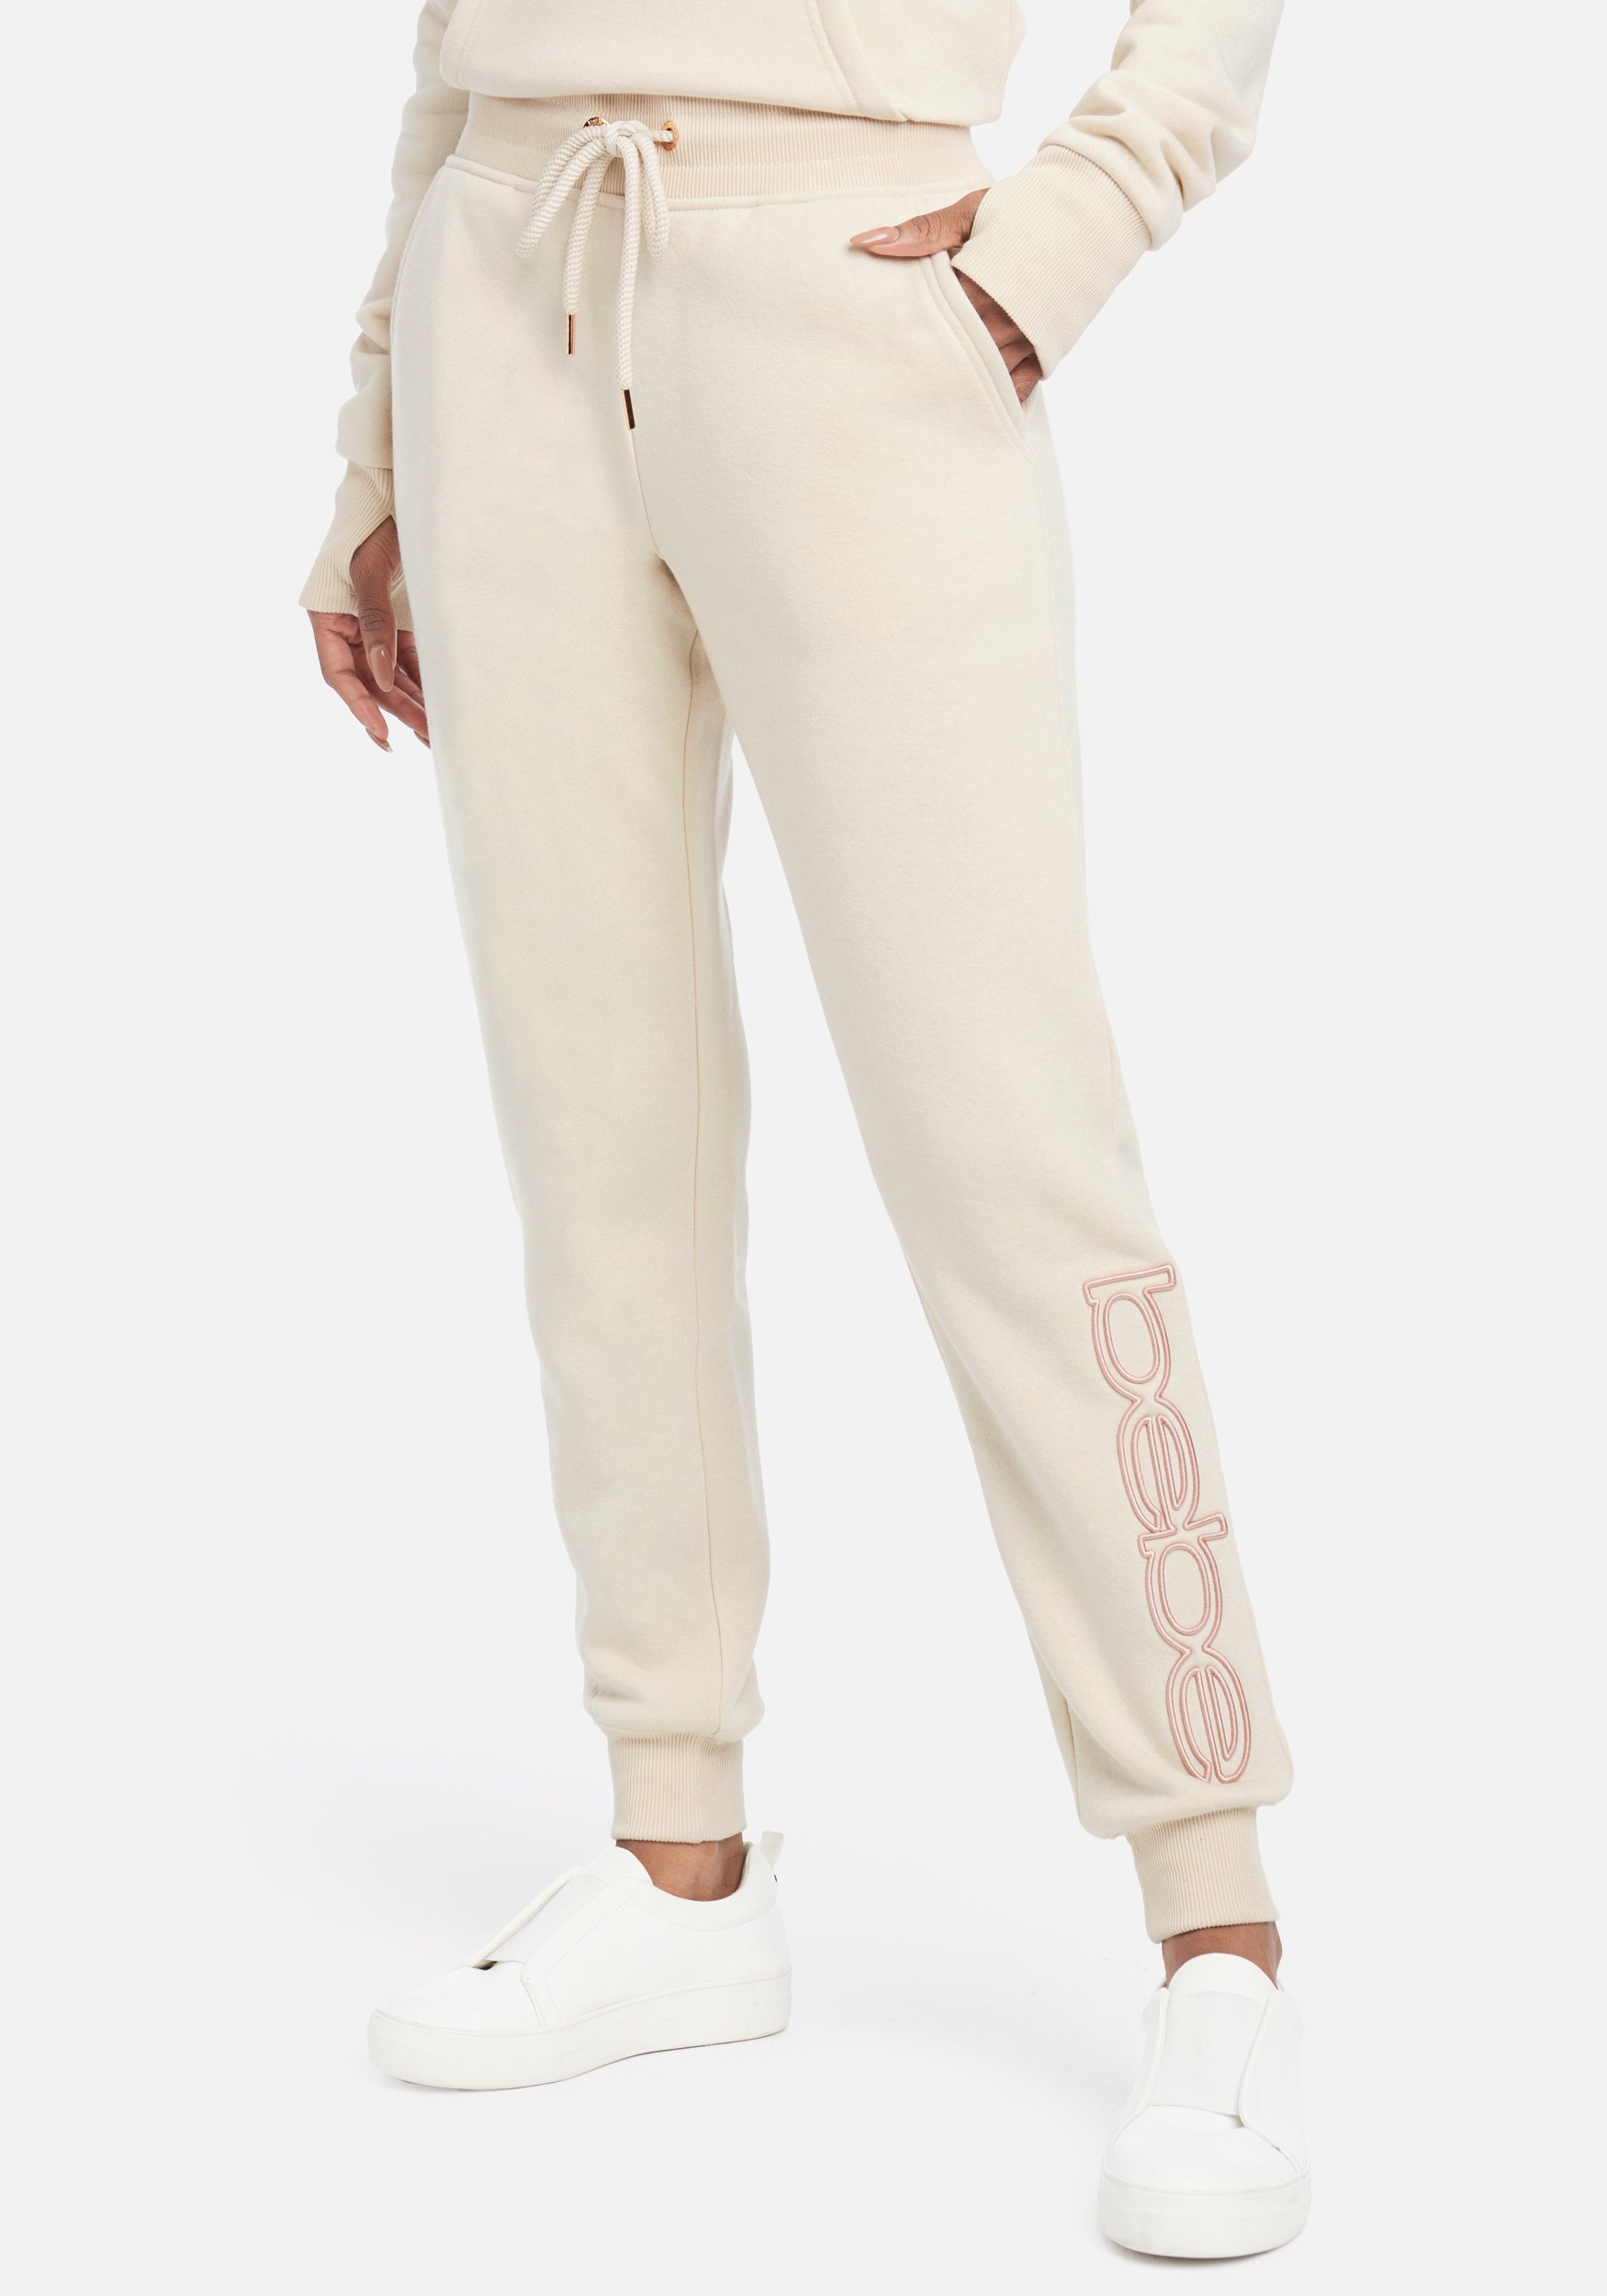 Women's Bebe Sport Embroidered Logo Jogger Pant, Size Large in Ivory Cotton